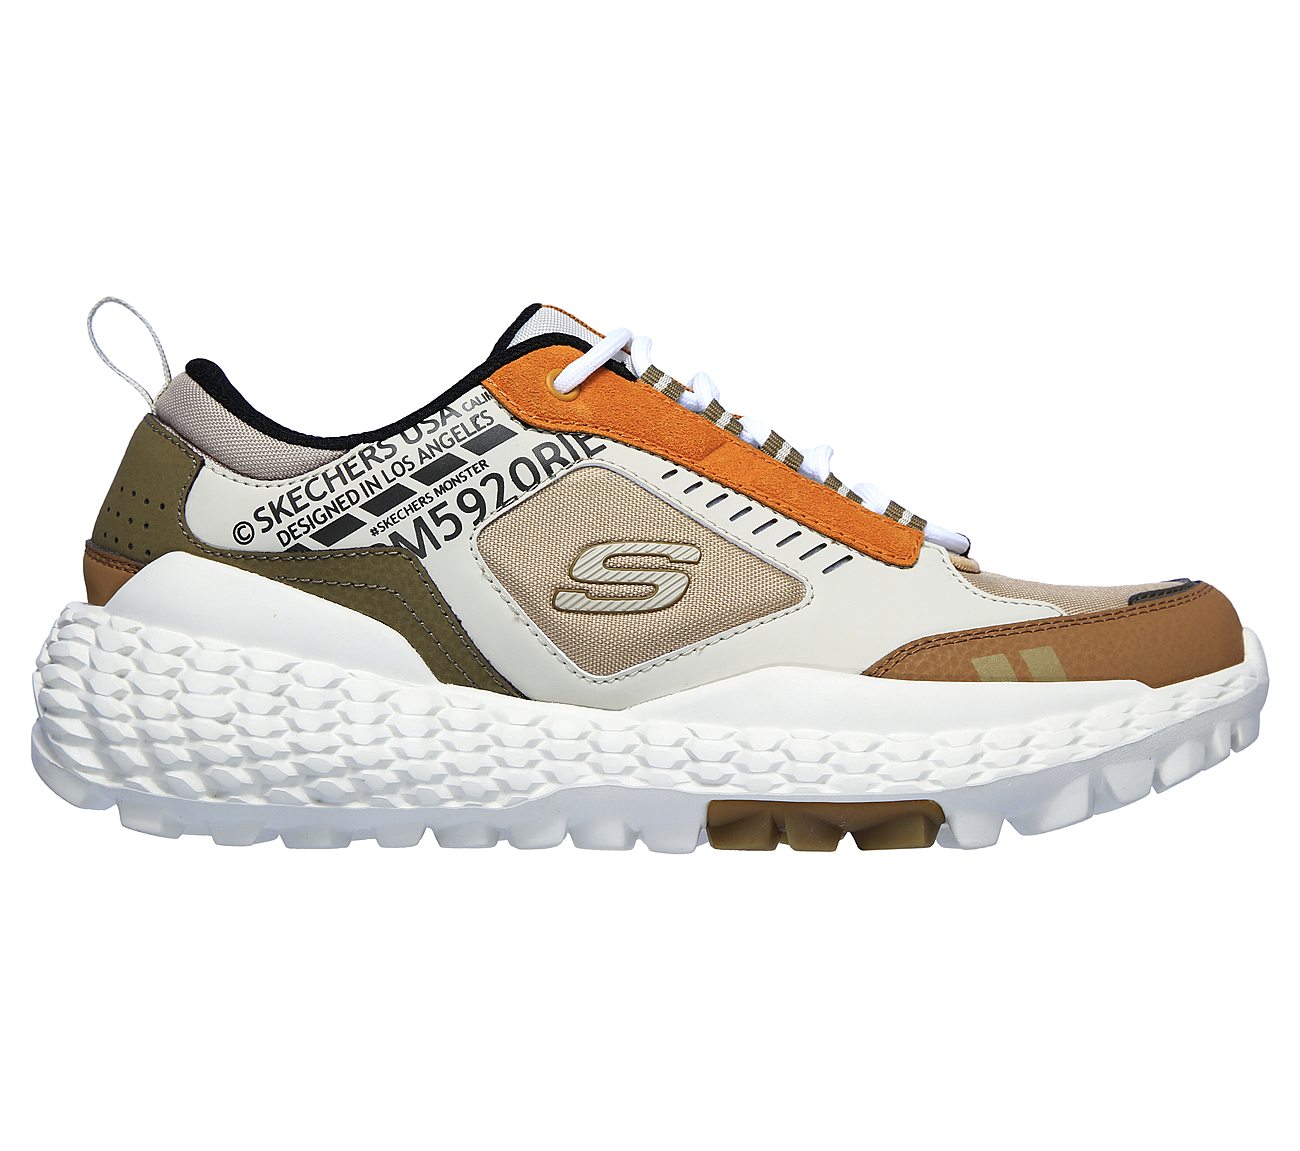 SKECHERS MONSTER, TAUPE/NATURAL Footwear Lateral View